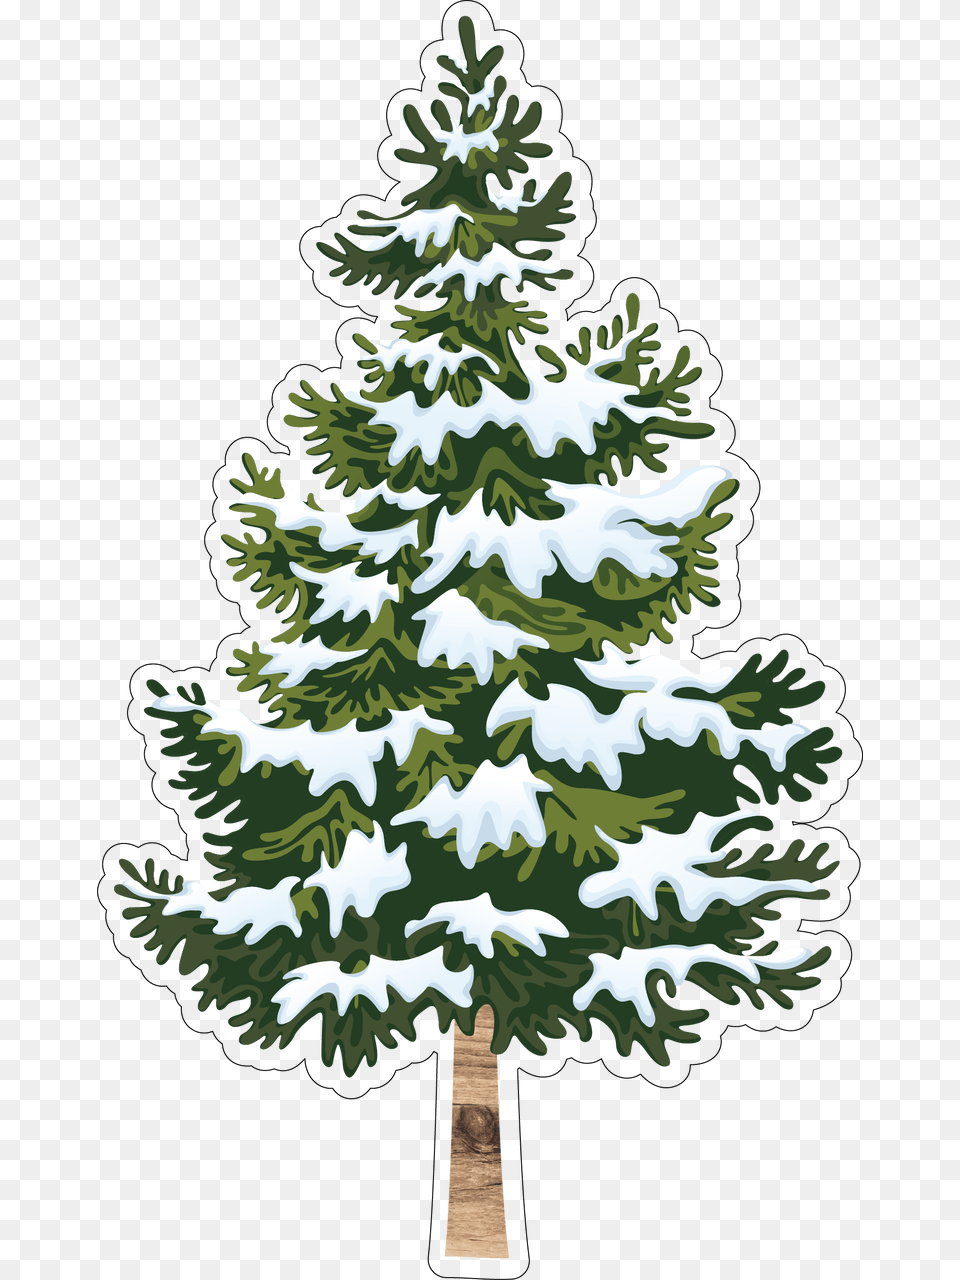 Let It Snow Tree Print Amp Cut File Fir Tree Christmas Vector, Pine, Plant, Conifer Free Png Download